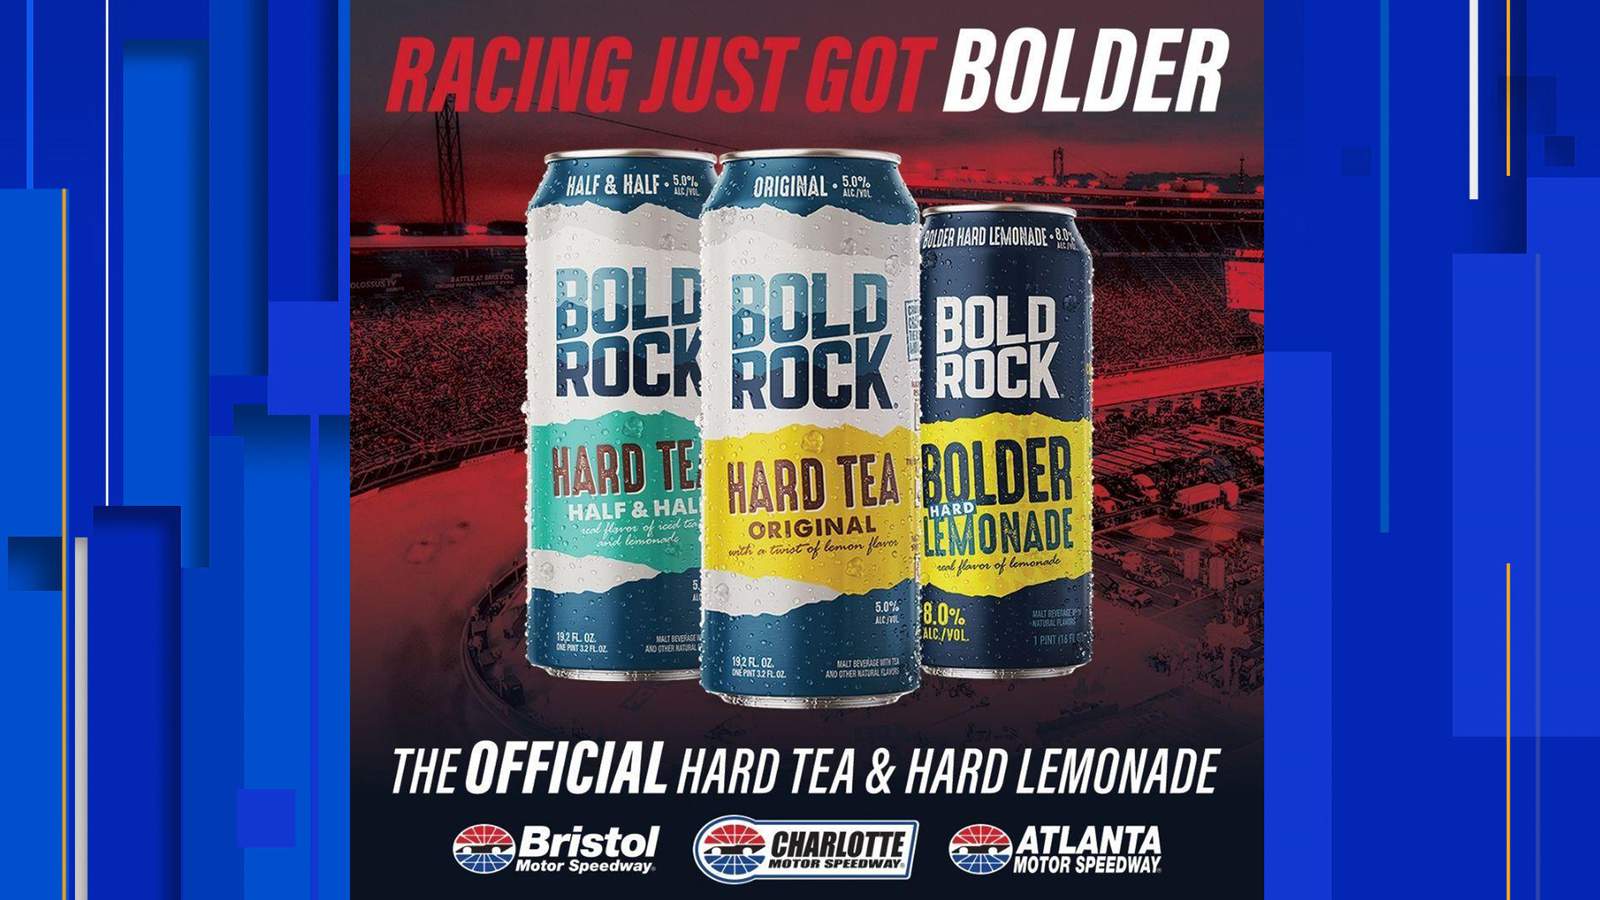 Bold Rock partners with Bristol Motor Speedway to offer new drink choices